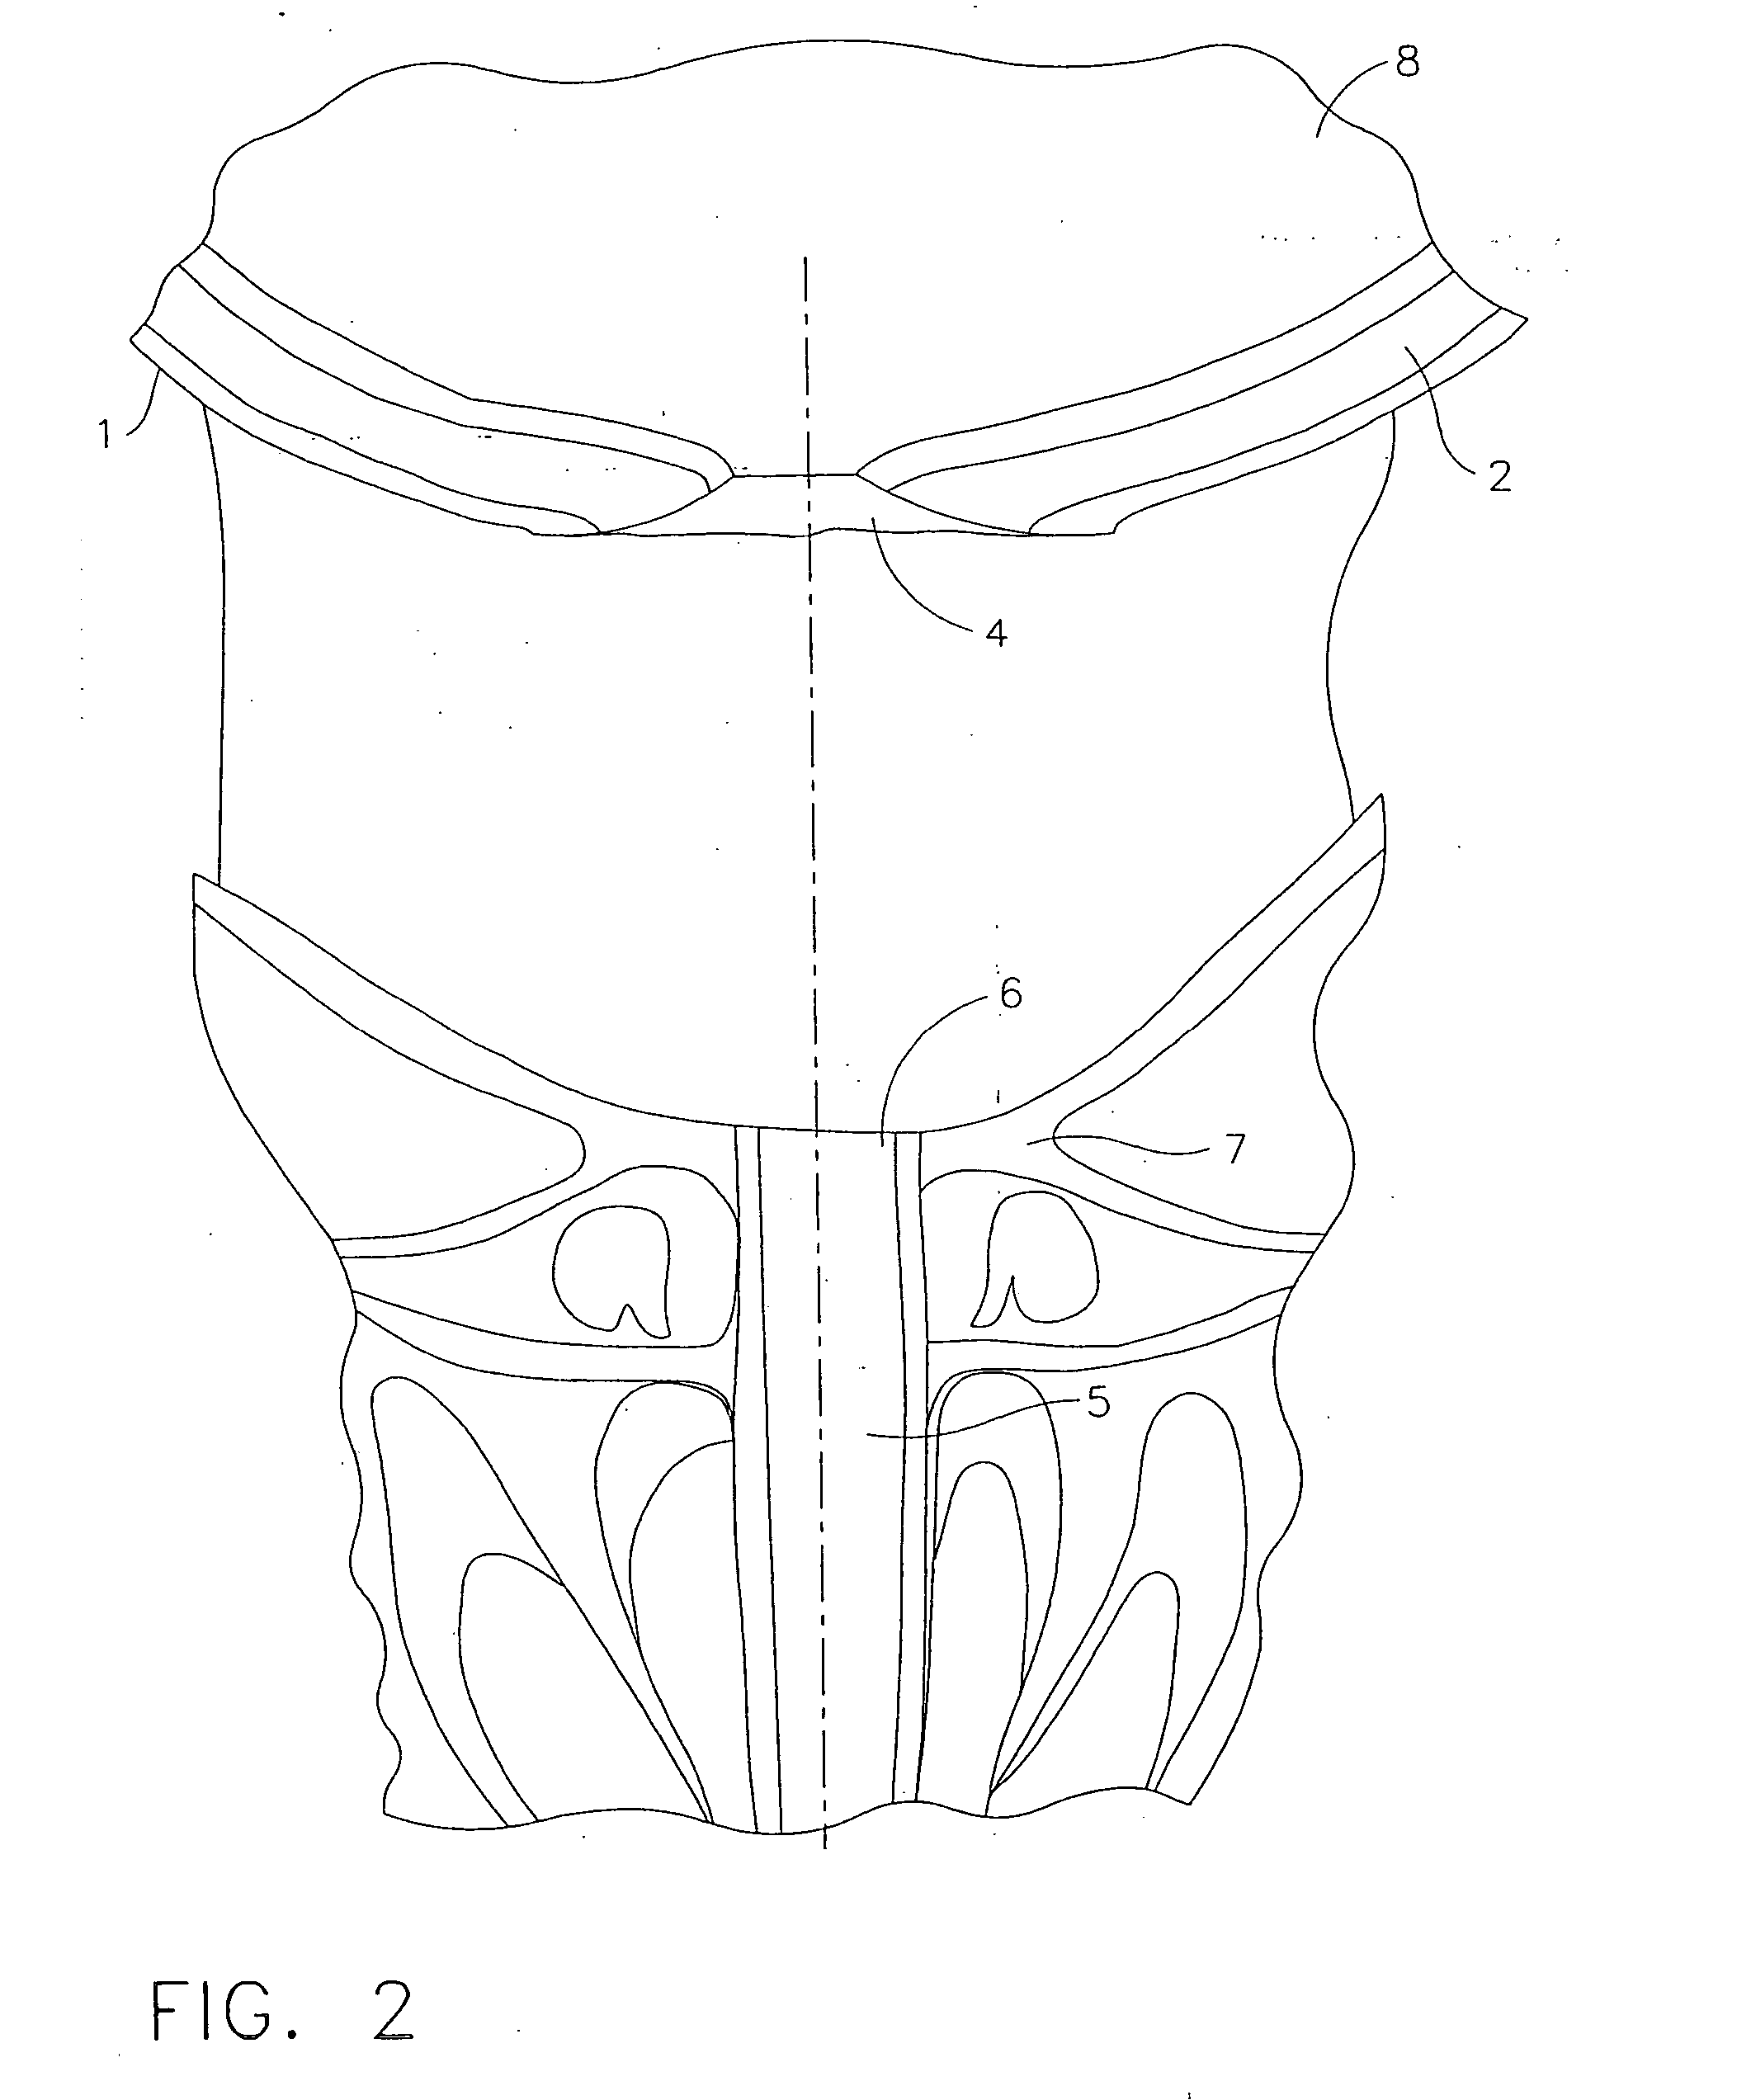 Method and instrument for effecting anastomosis of respective tissues defining two body lumens